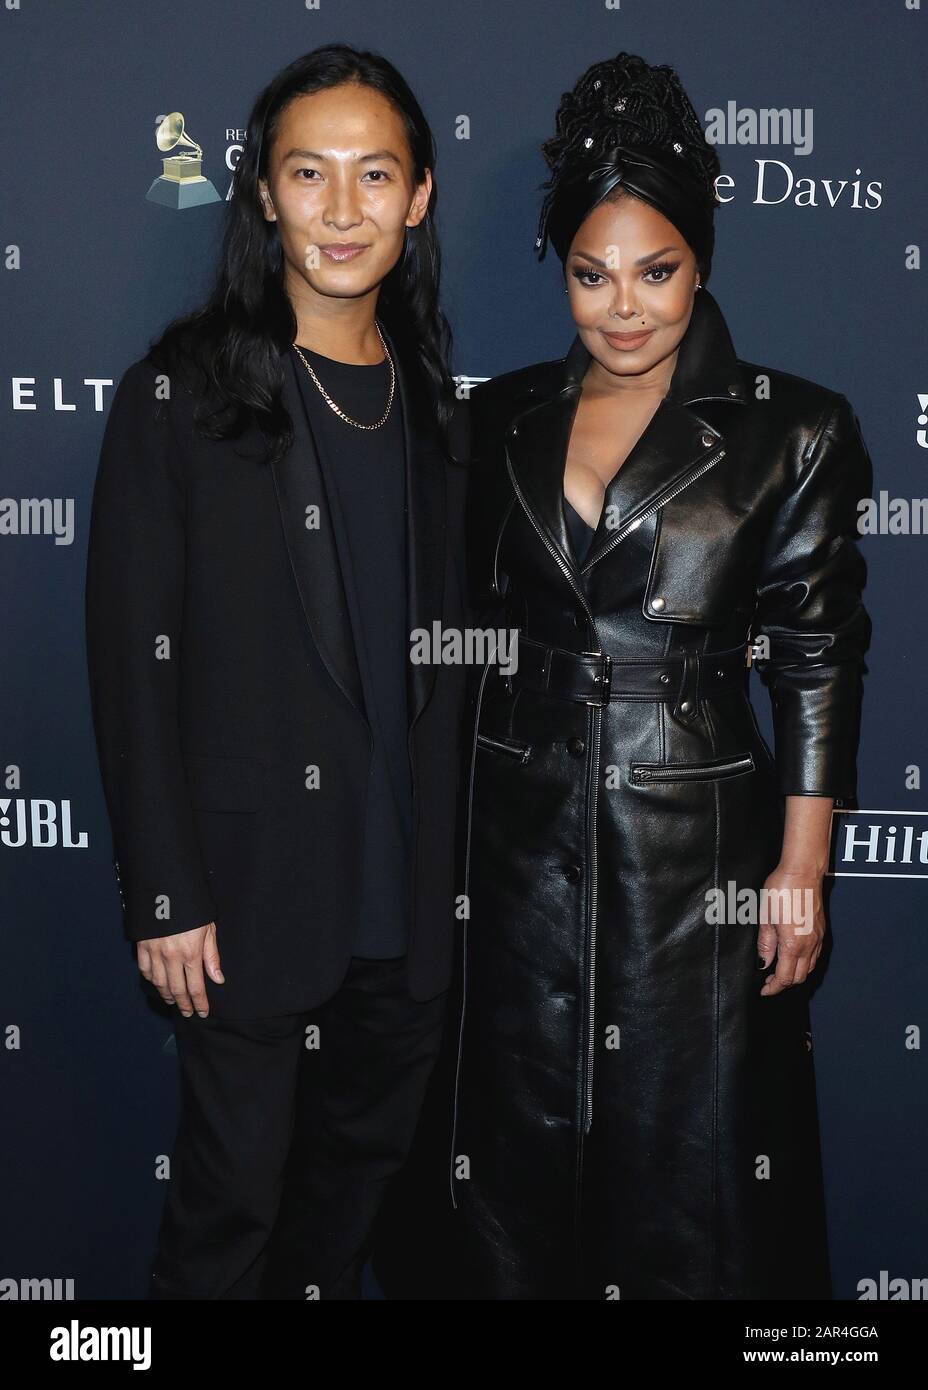 Beverly Hills, United States. 25th Jan, 2020. BEVERLY HILLS, LOS ANGELES, CALIFORNIA, USA - JANUARY 25: Alexander Wang and Janet Jackson arrive at The Recording Academy And Clive Davis' 2020 Pre-GRAMMY Gala held at The Beverly Hilton Hotel on January 25, 2020 in Beverly Hills, Los Angeles, California, United States. (Photo by Xavier Collin/Image Press Agency) Credit: Image Press Agency/Alamy Live News Stock Photo